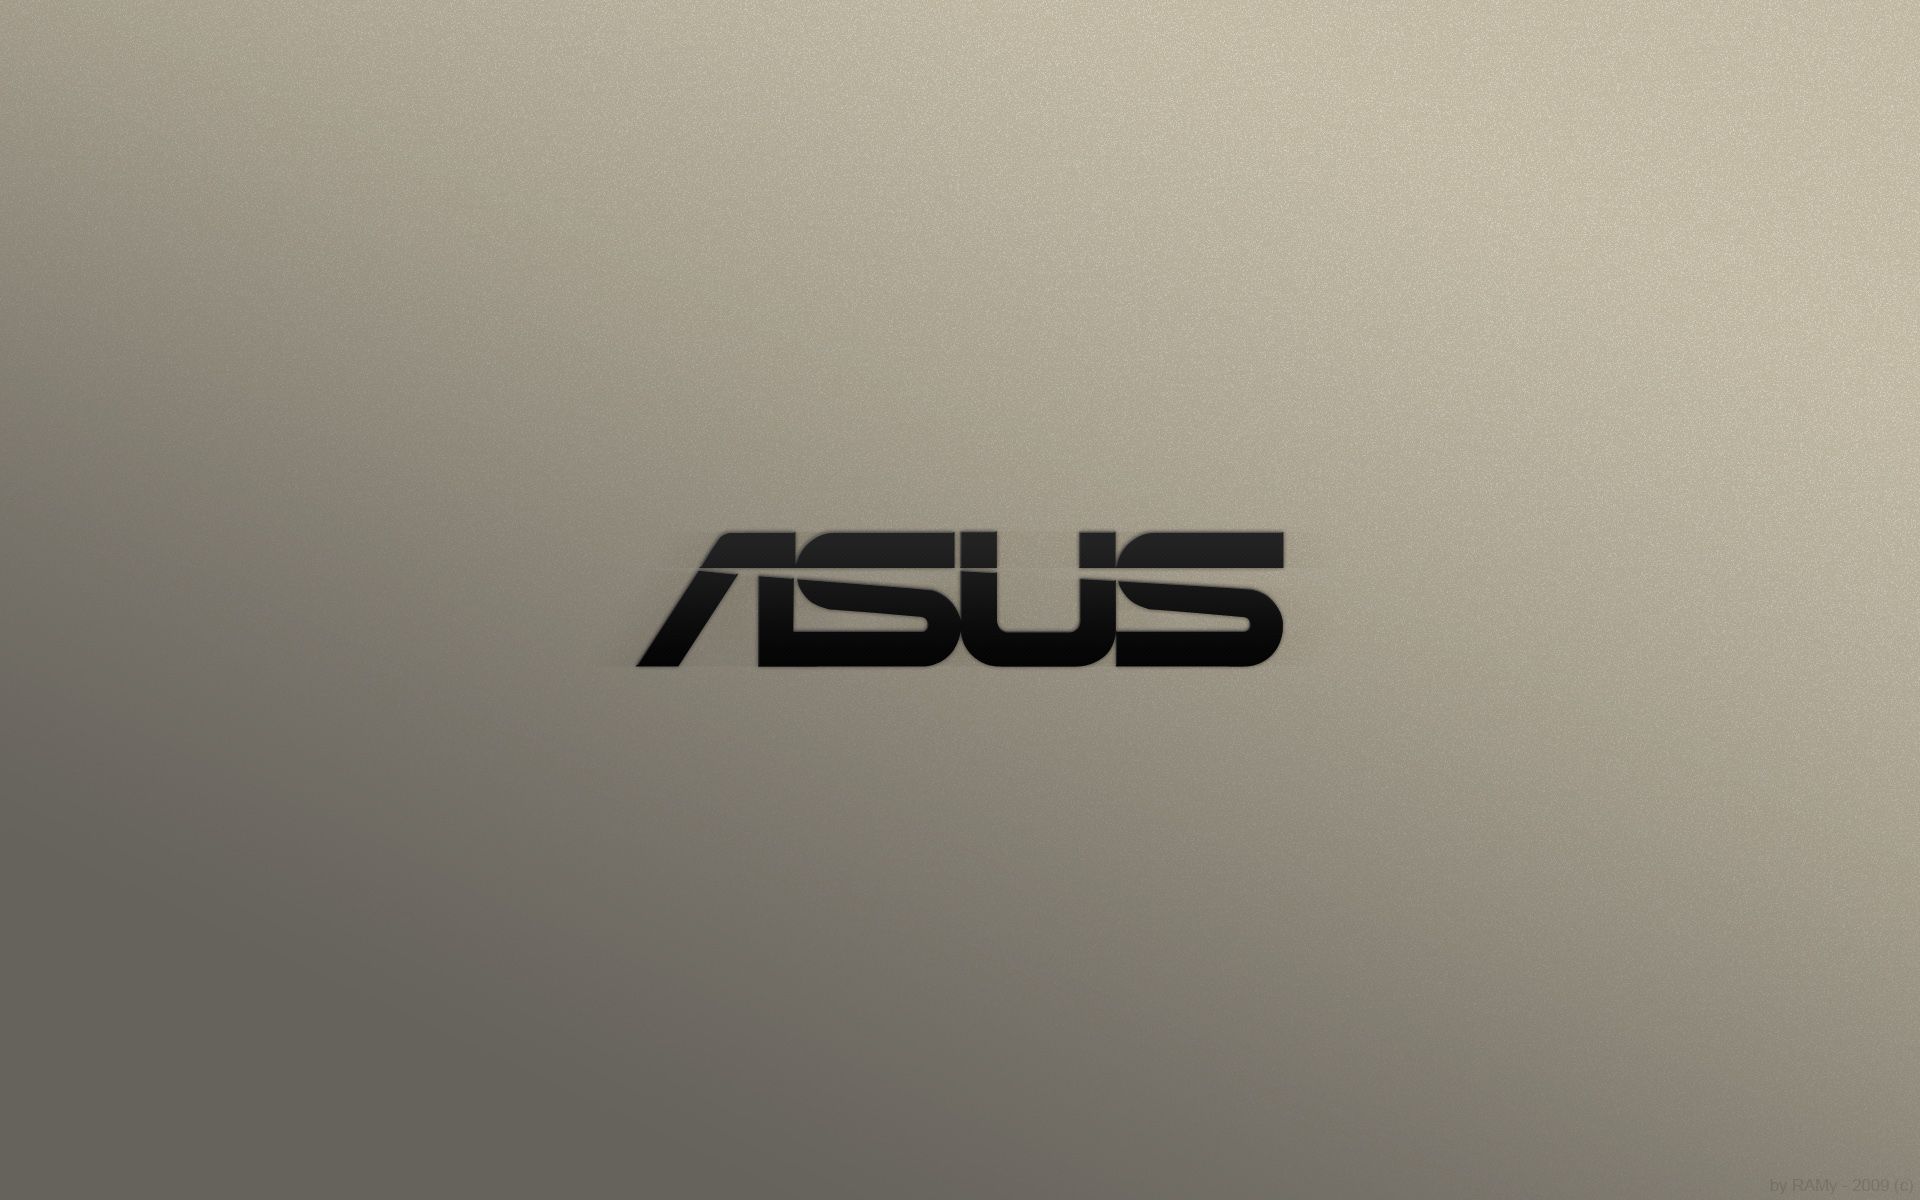 Asus Wallpapers Full HD Pictures